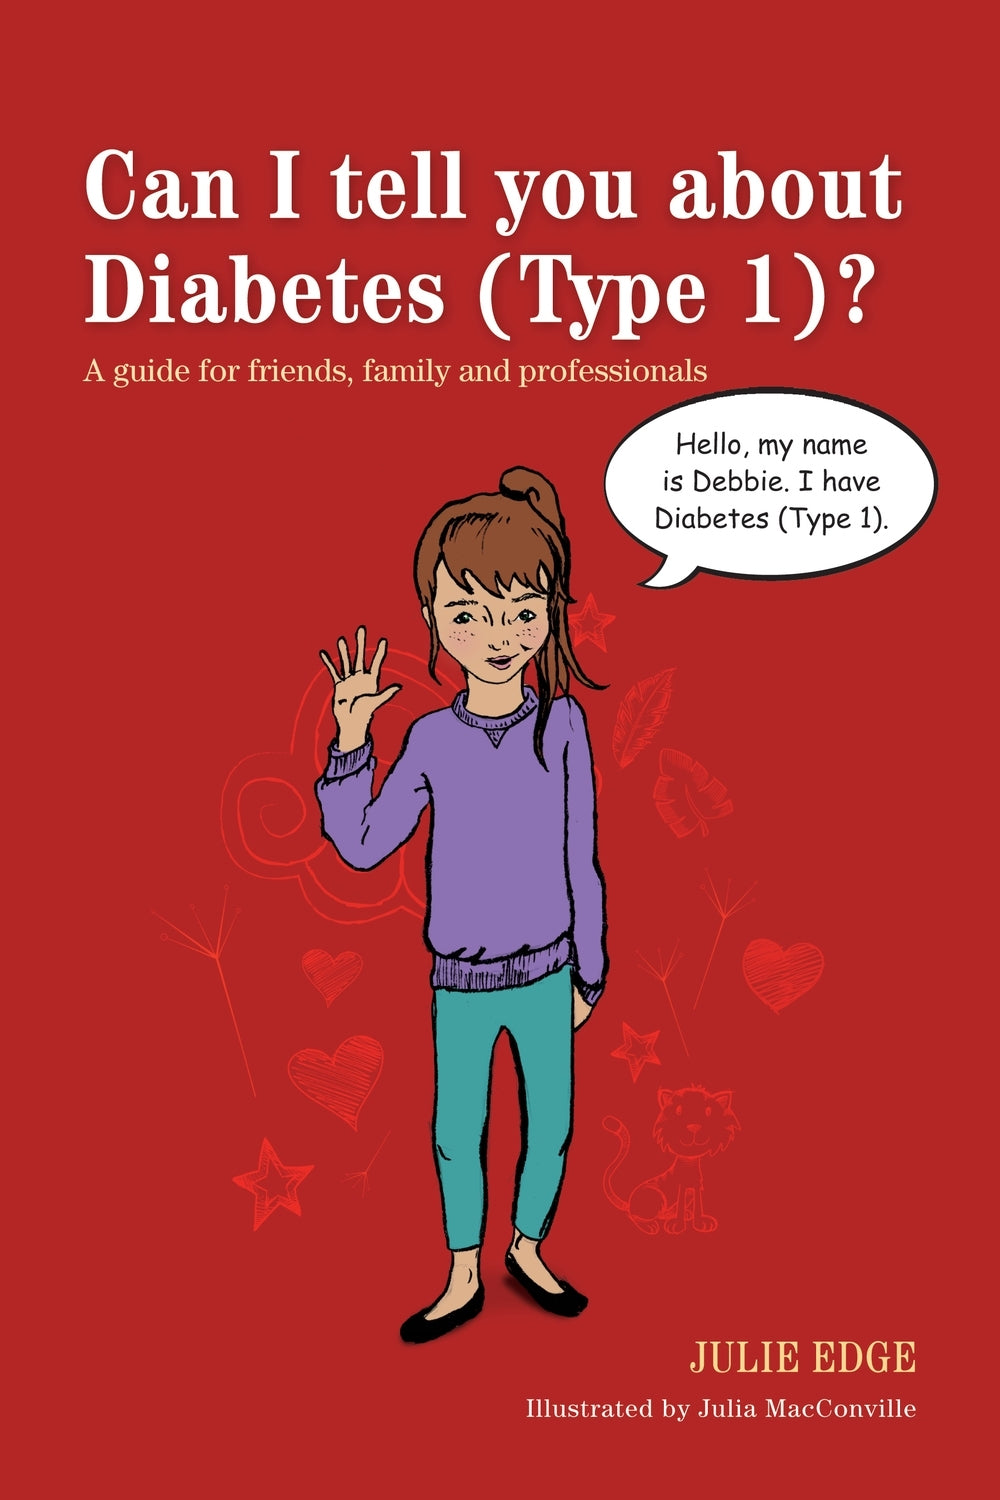 Can I tell you about Diabetes (Type 1)? by Julie Edge, Julia MacConville